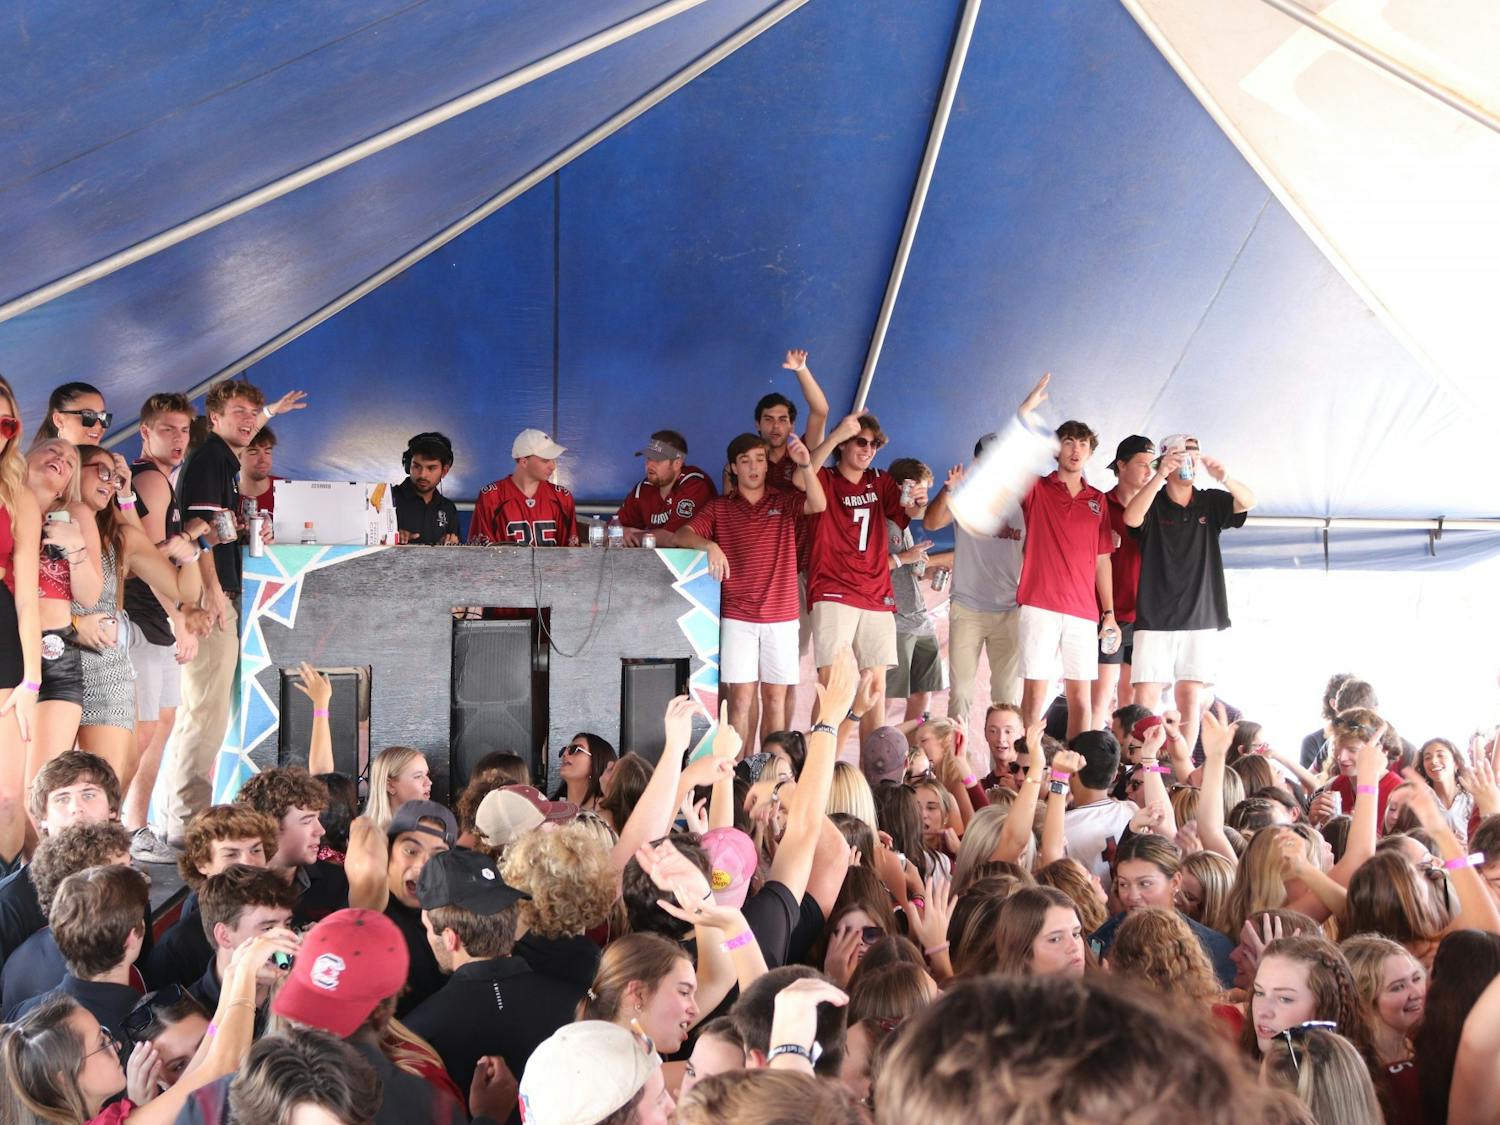 Students listen to music and dance while partying at the Fraternity Lots, a popular student tailgating event.